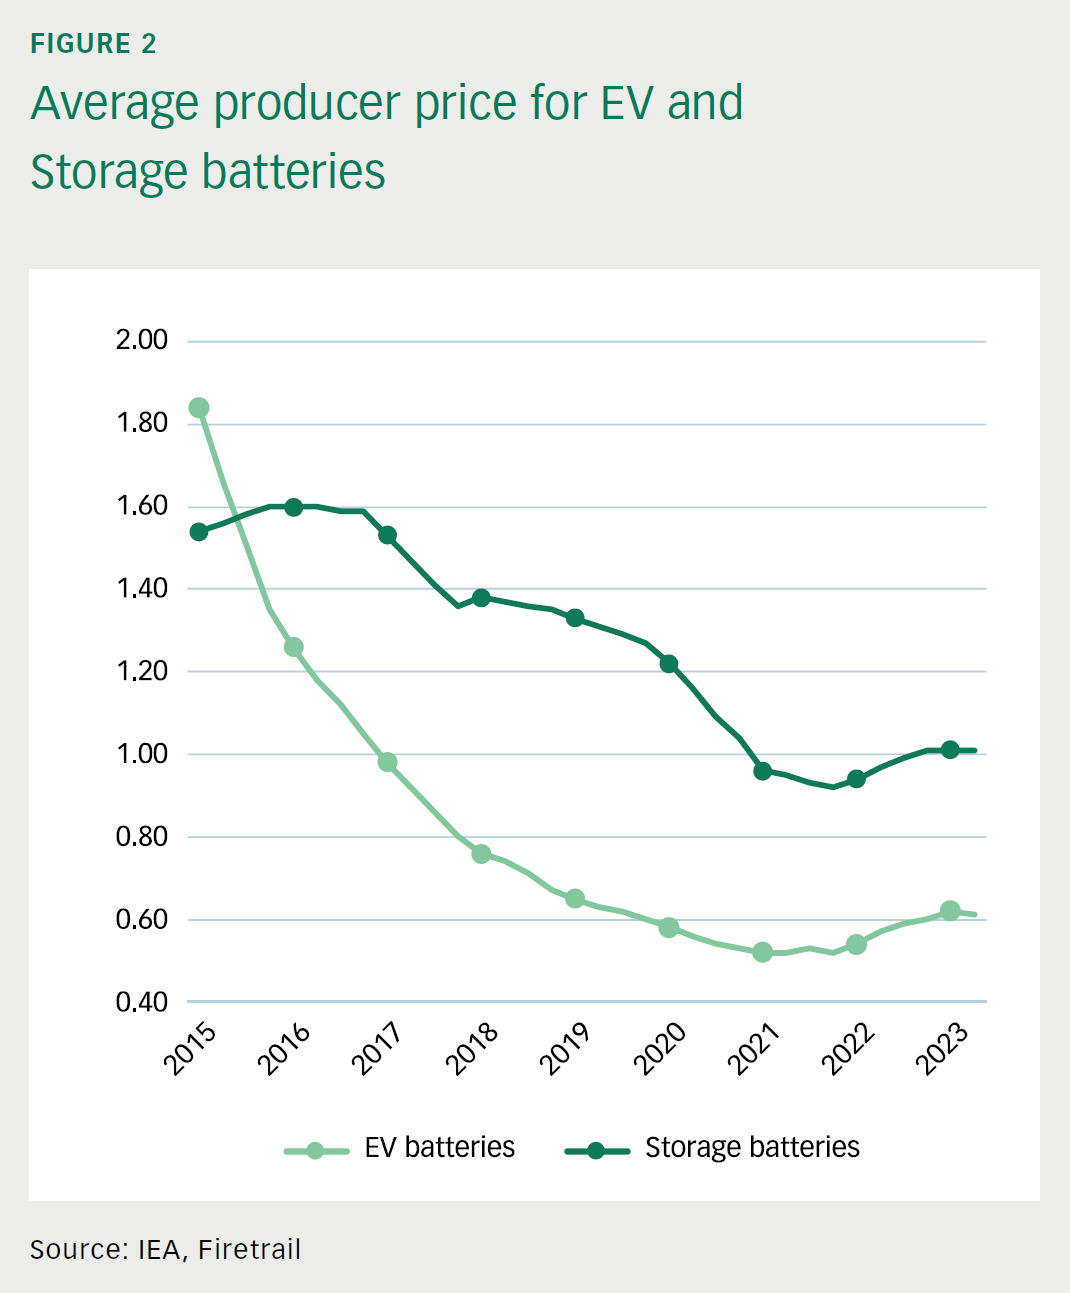 Average producer price for EV and Storage batteries